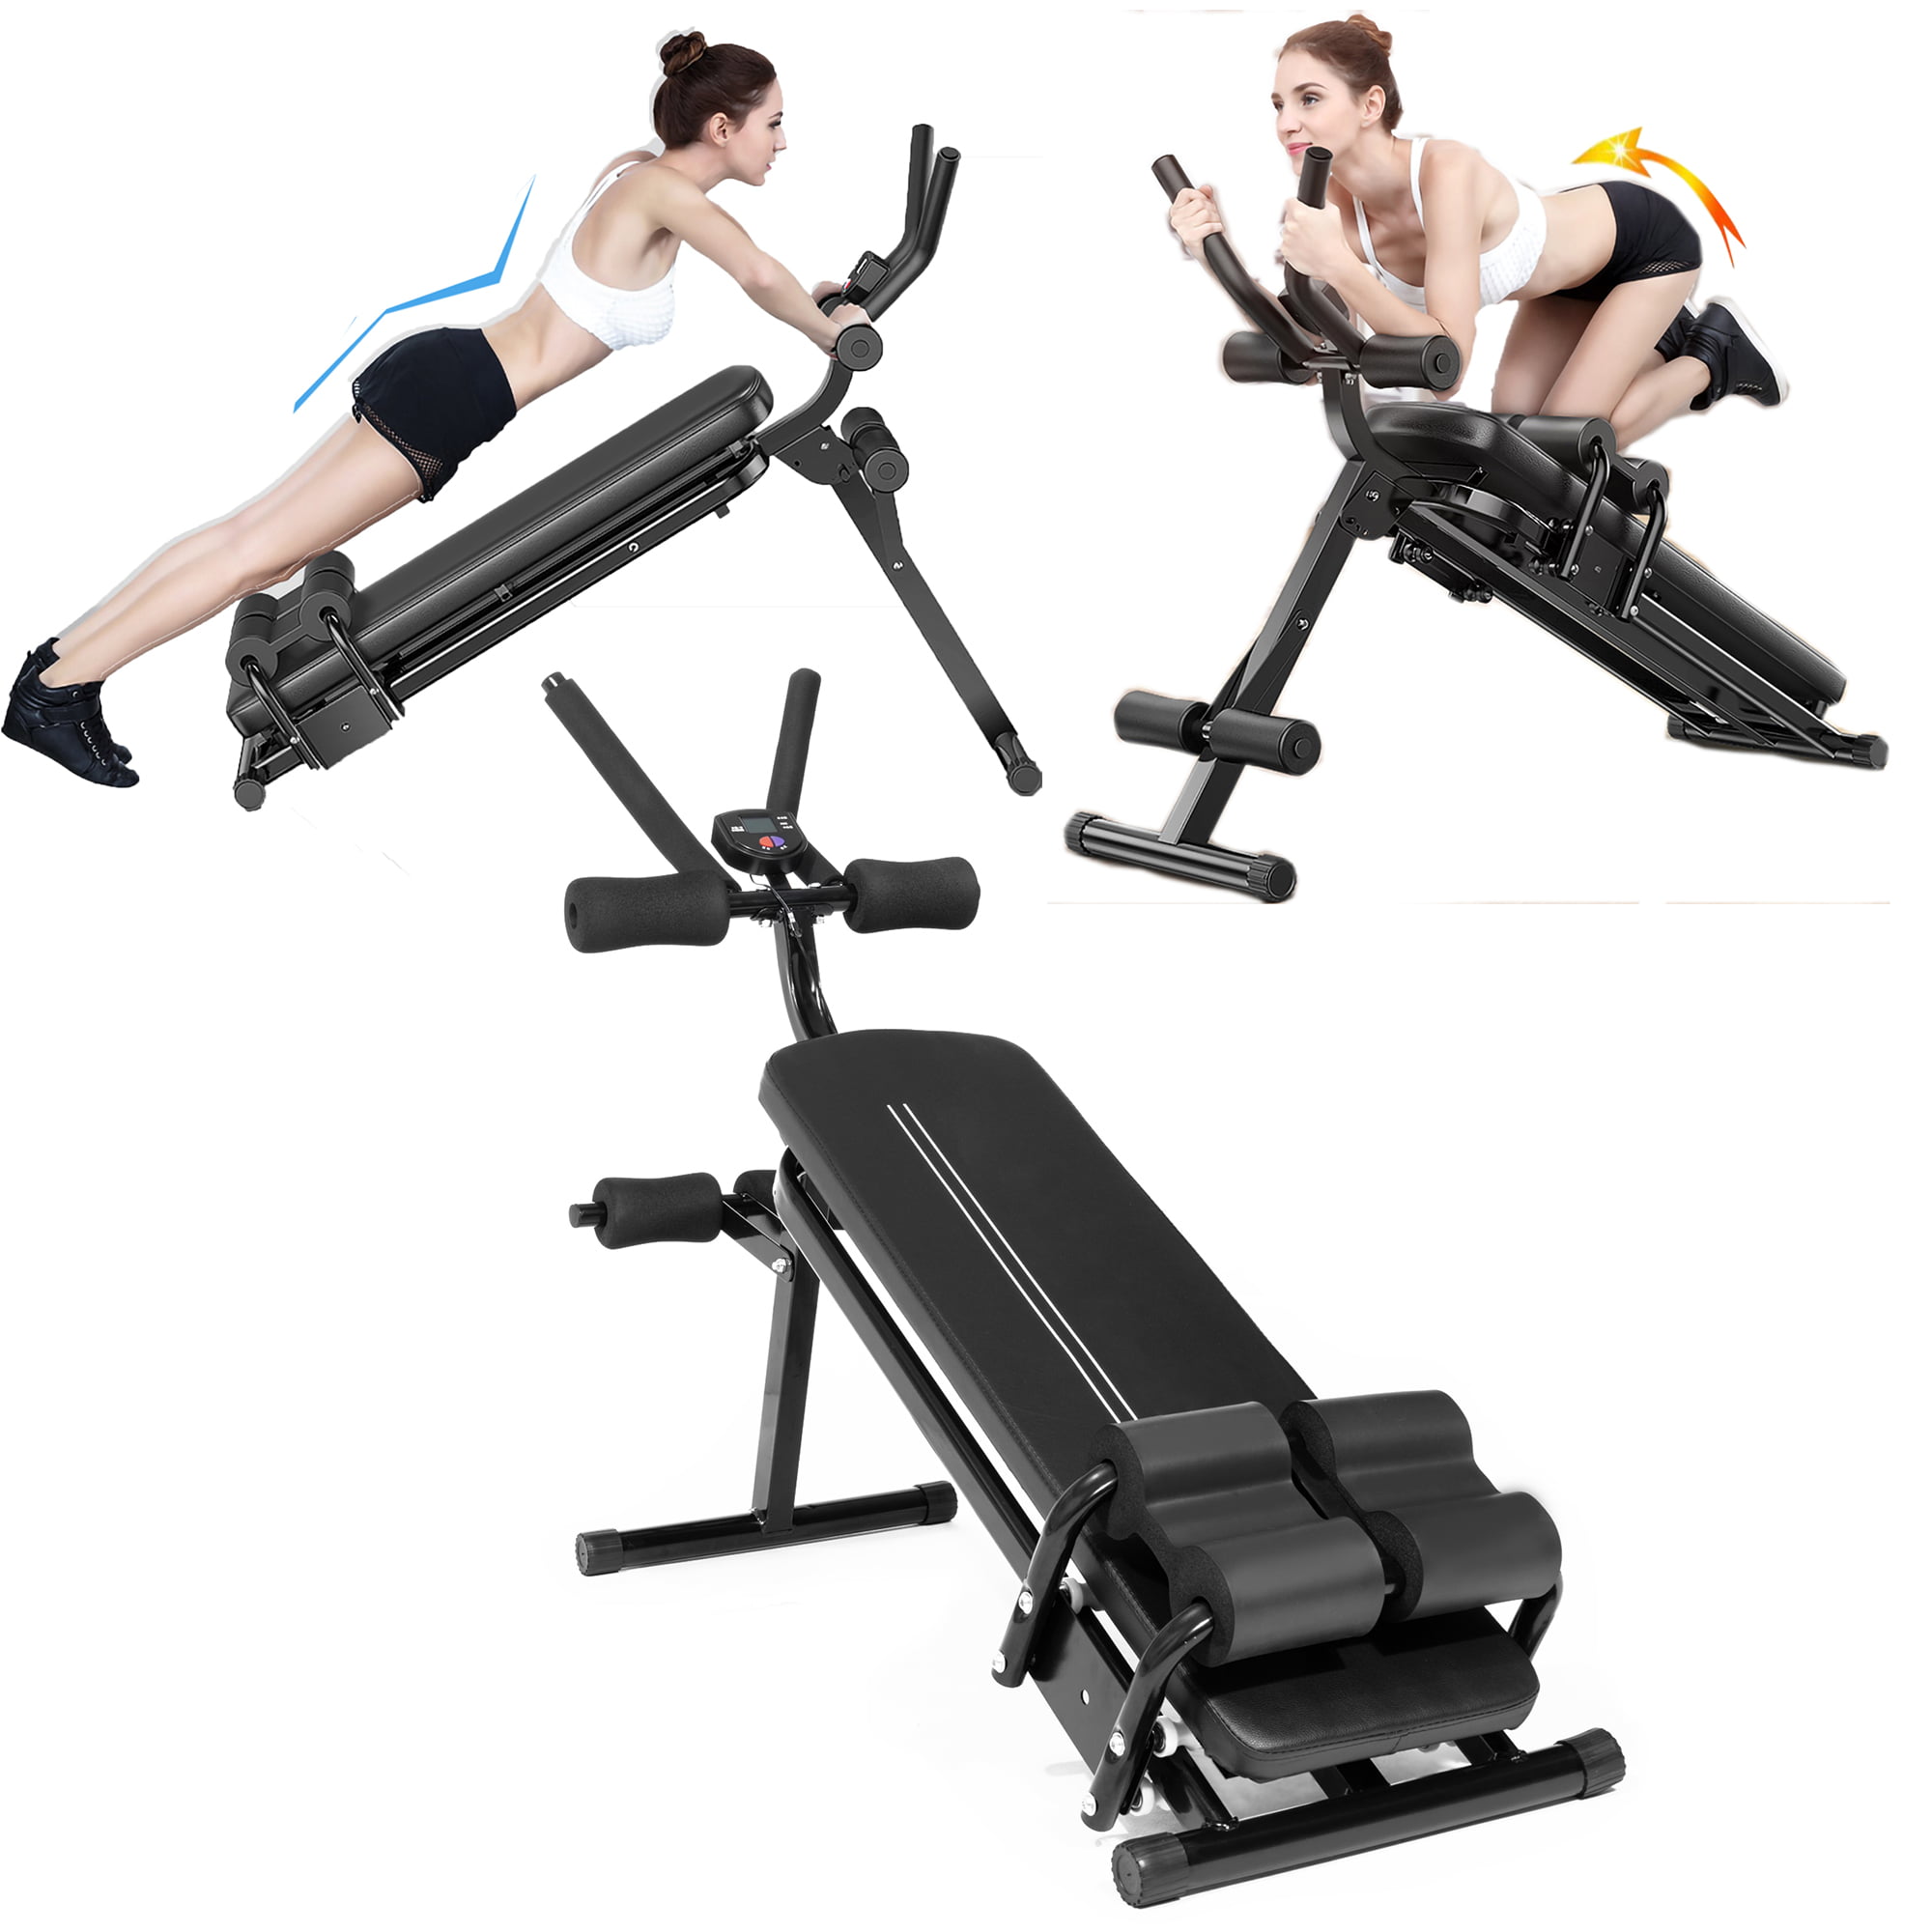 Best Fitness BFAB10 Folding Ab Board Crunch Home Gym Exercise Equipment 